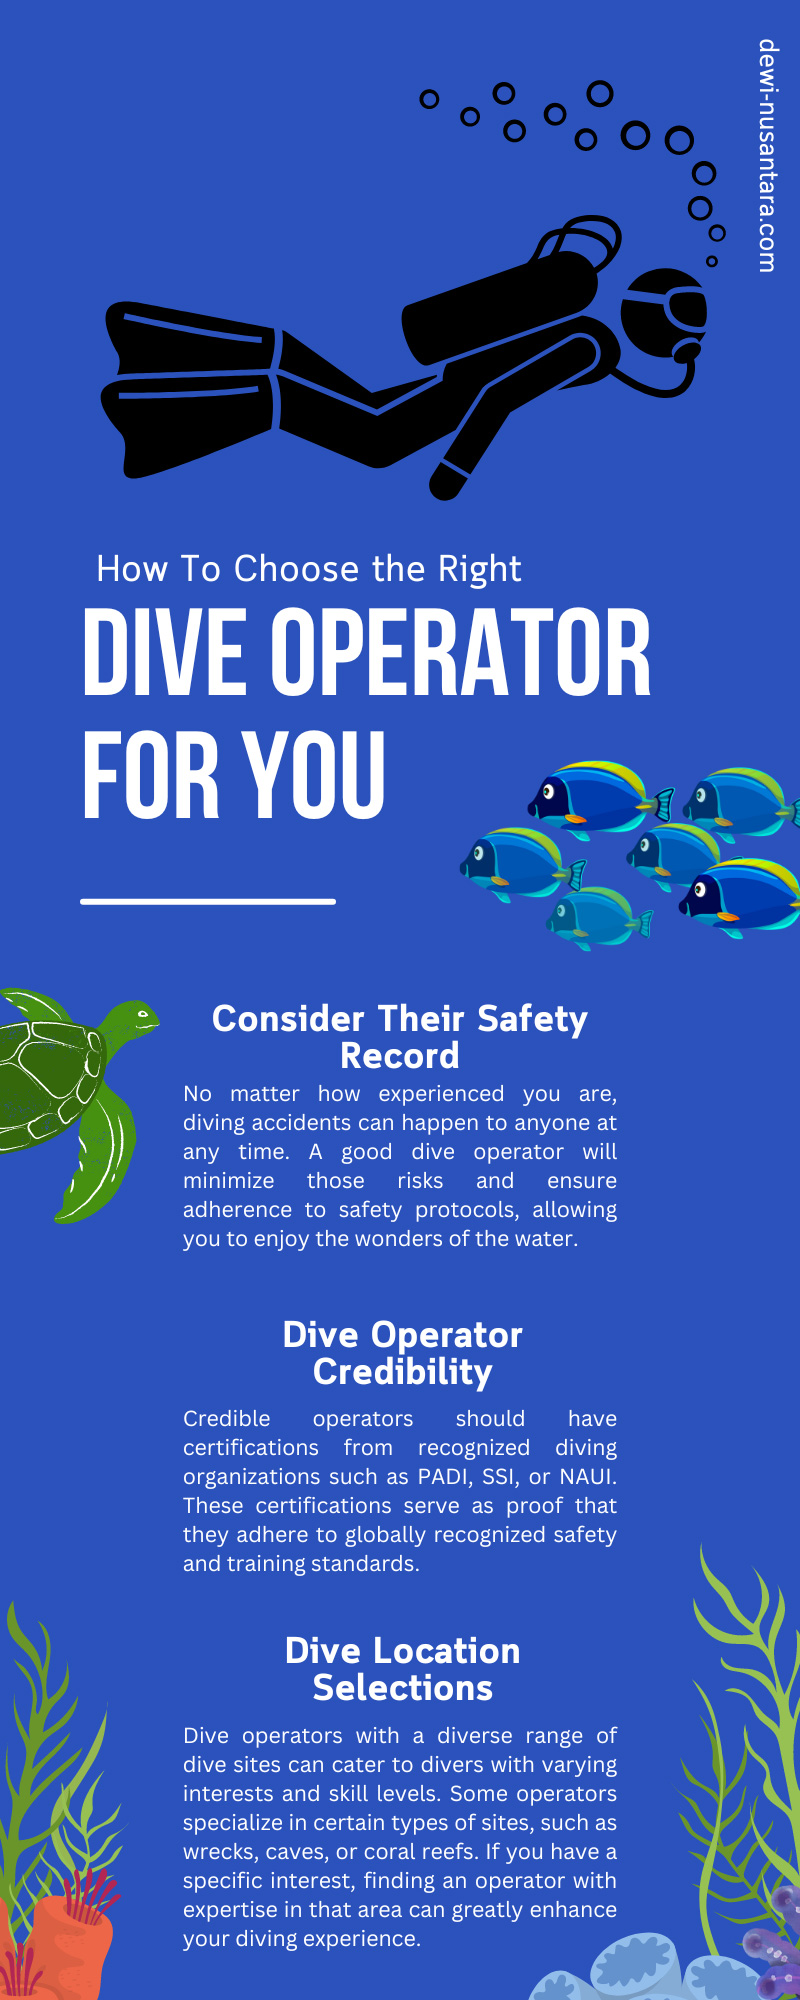 How To Choose the Right Dive Operator for You